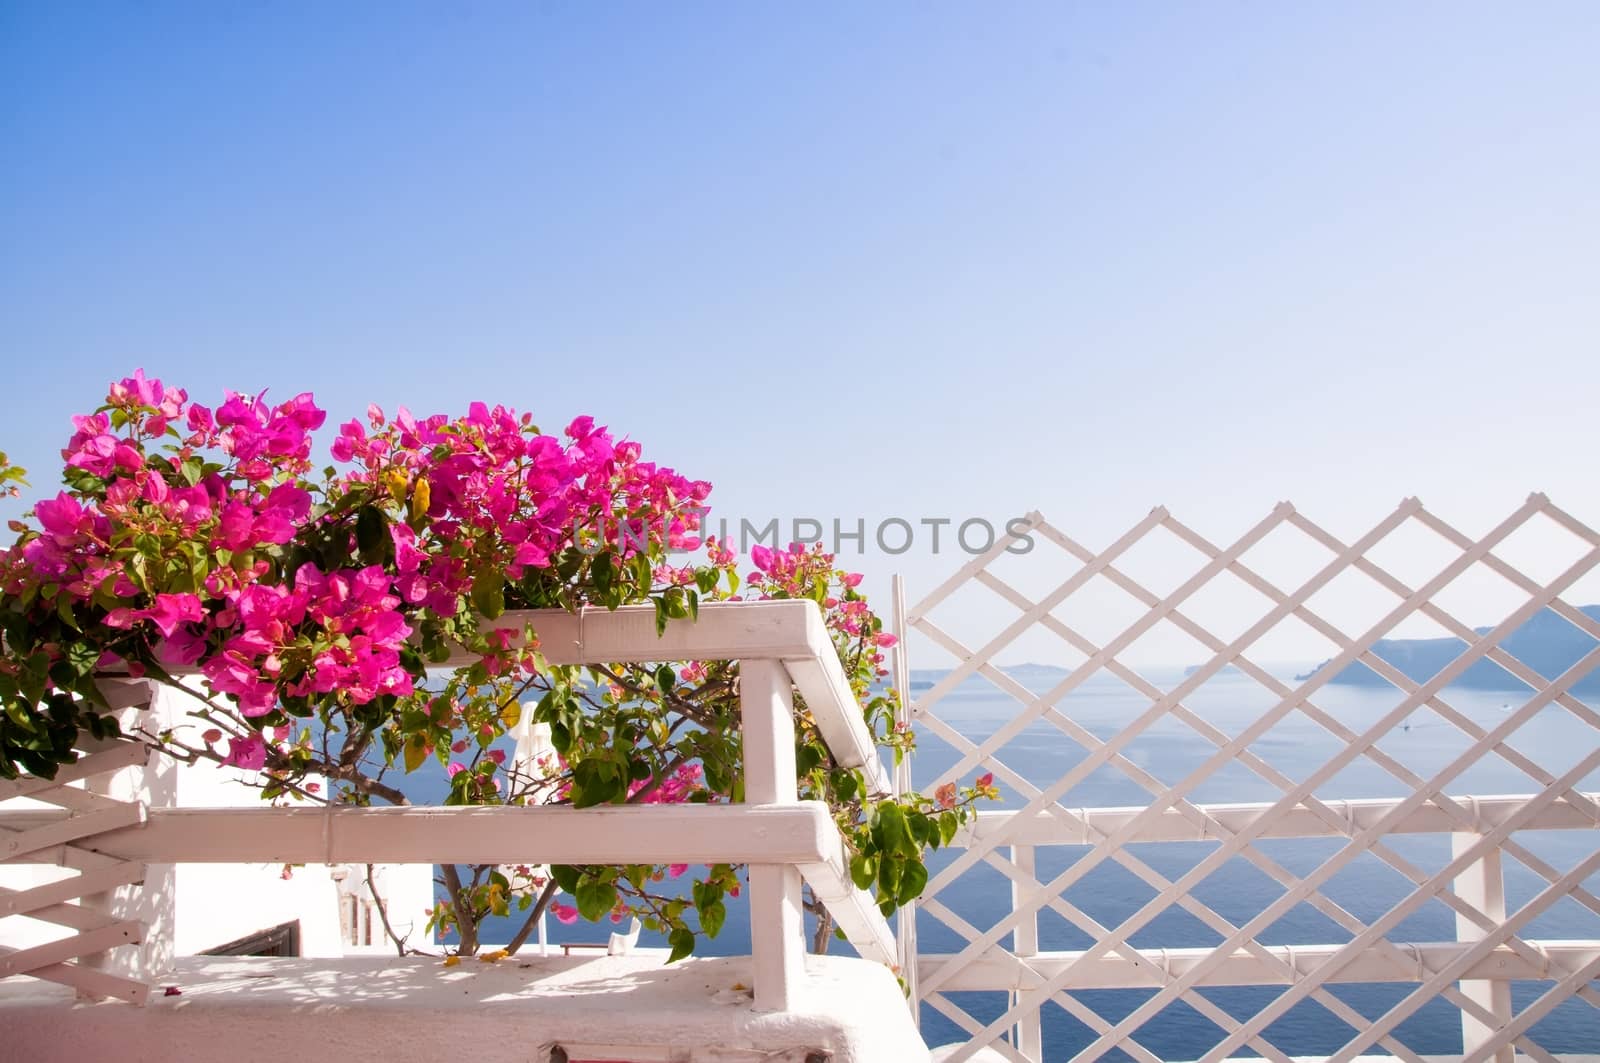 Lovely fence in Oia, Santorini by mitakag